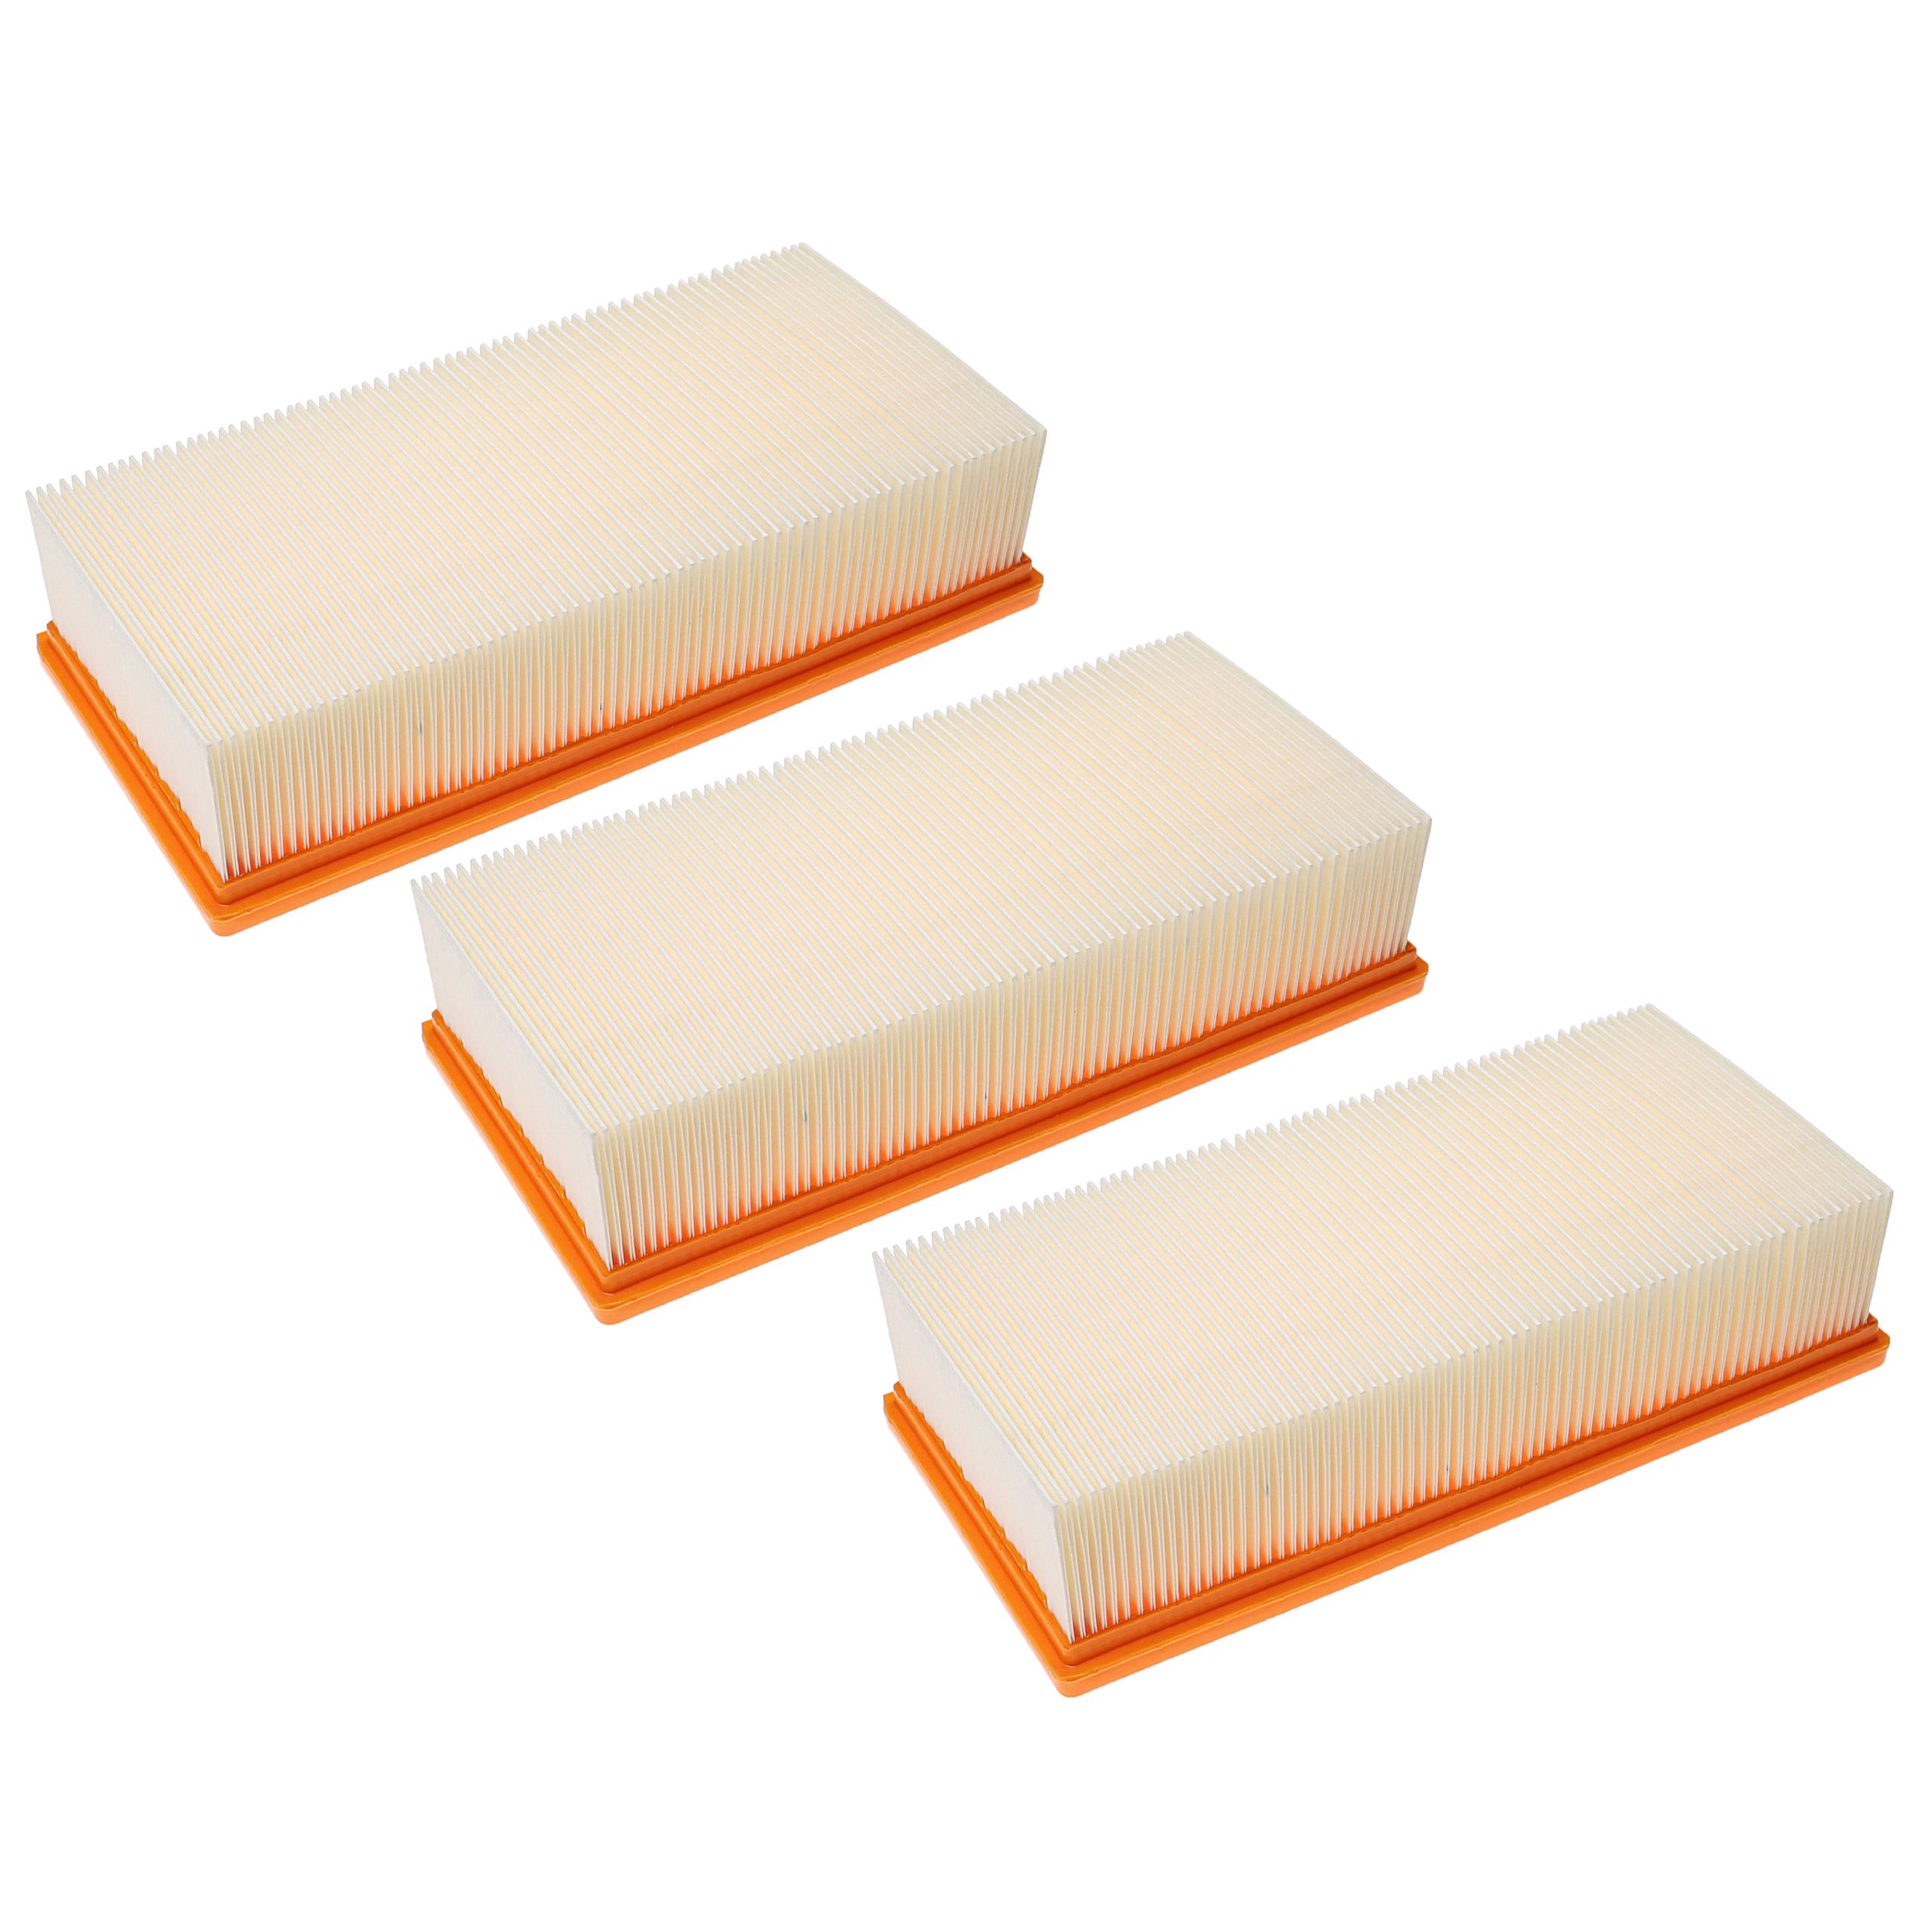 3x flat pleated filter replaces Kärcher 6.904-284.0 for KärcherVacuum Cleaner